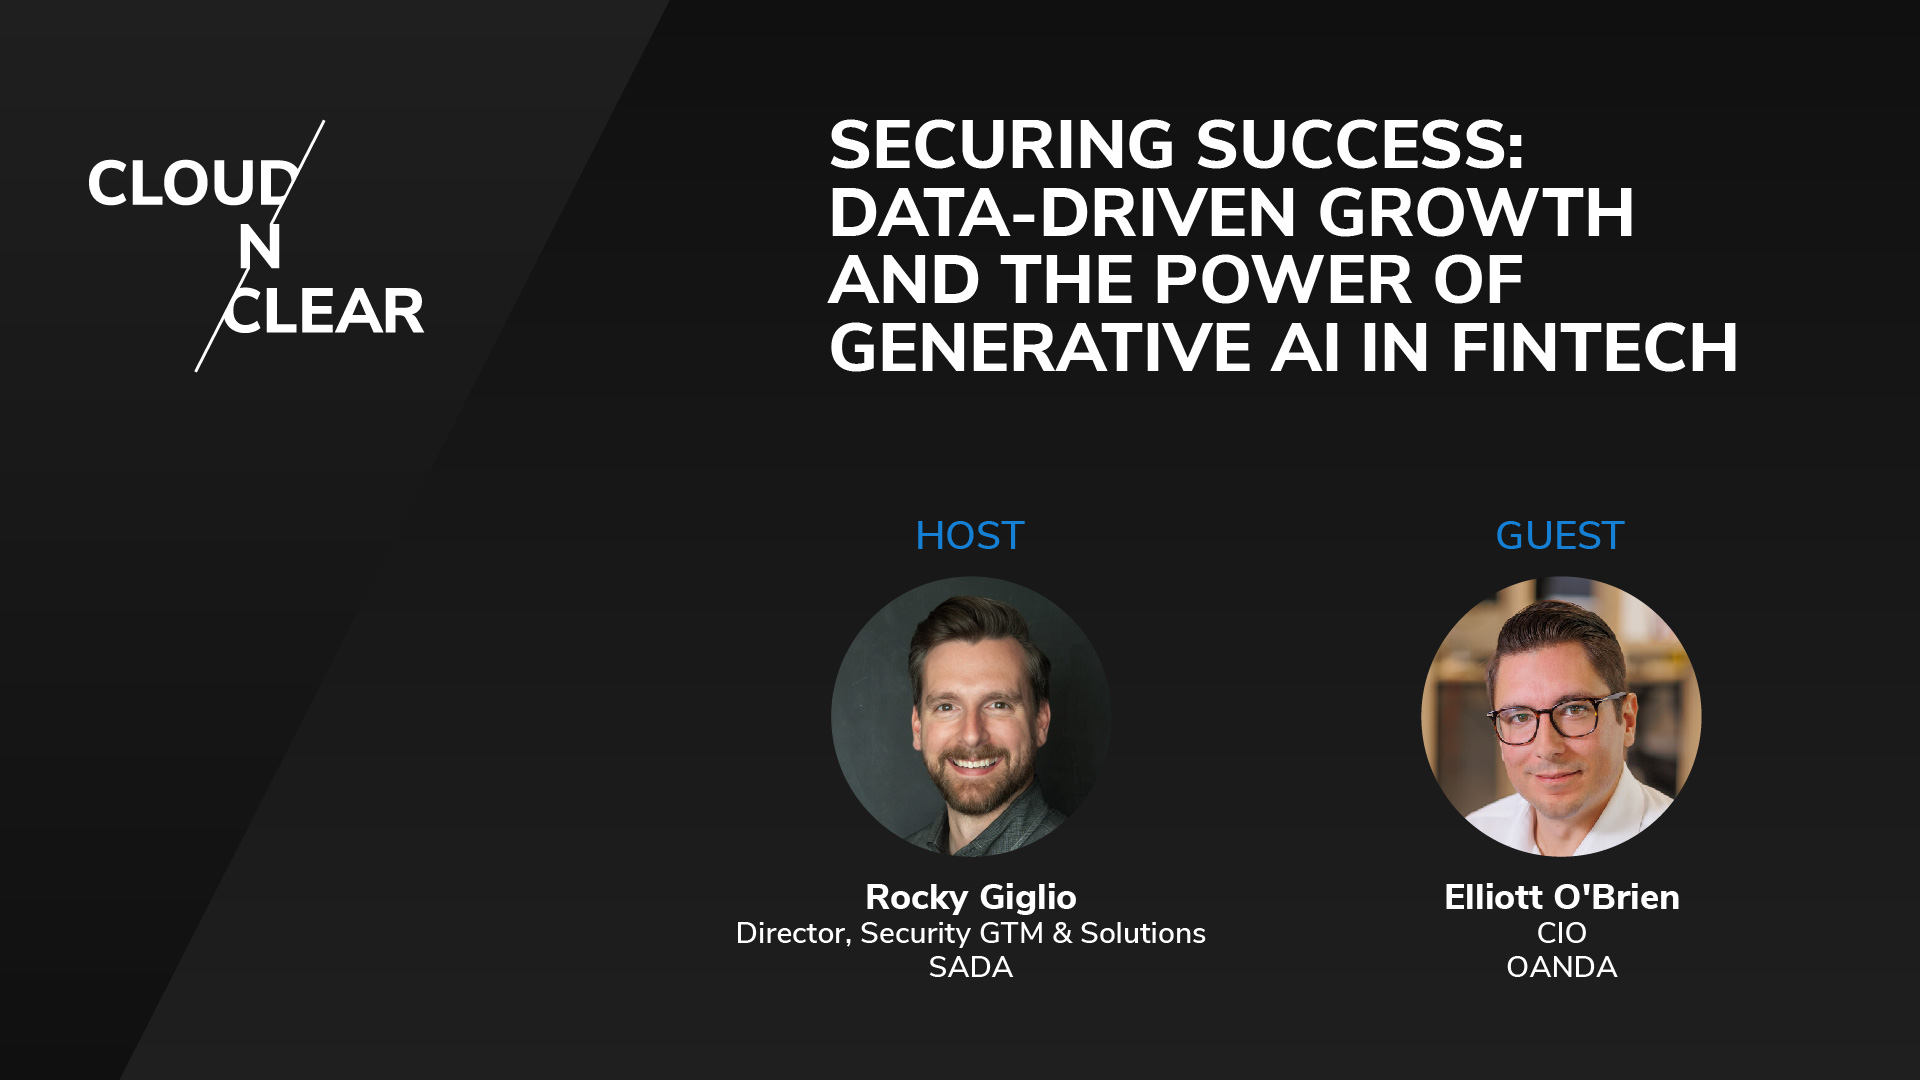 Securing Success: Data-Driven Growth and the Power of Generative AI in Fintech